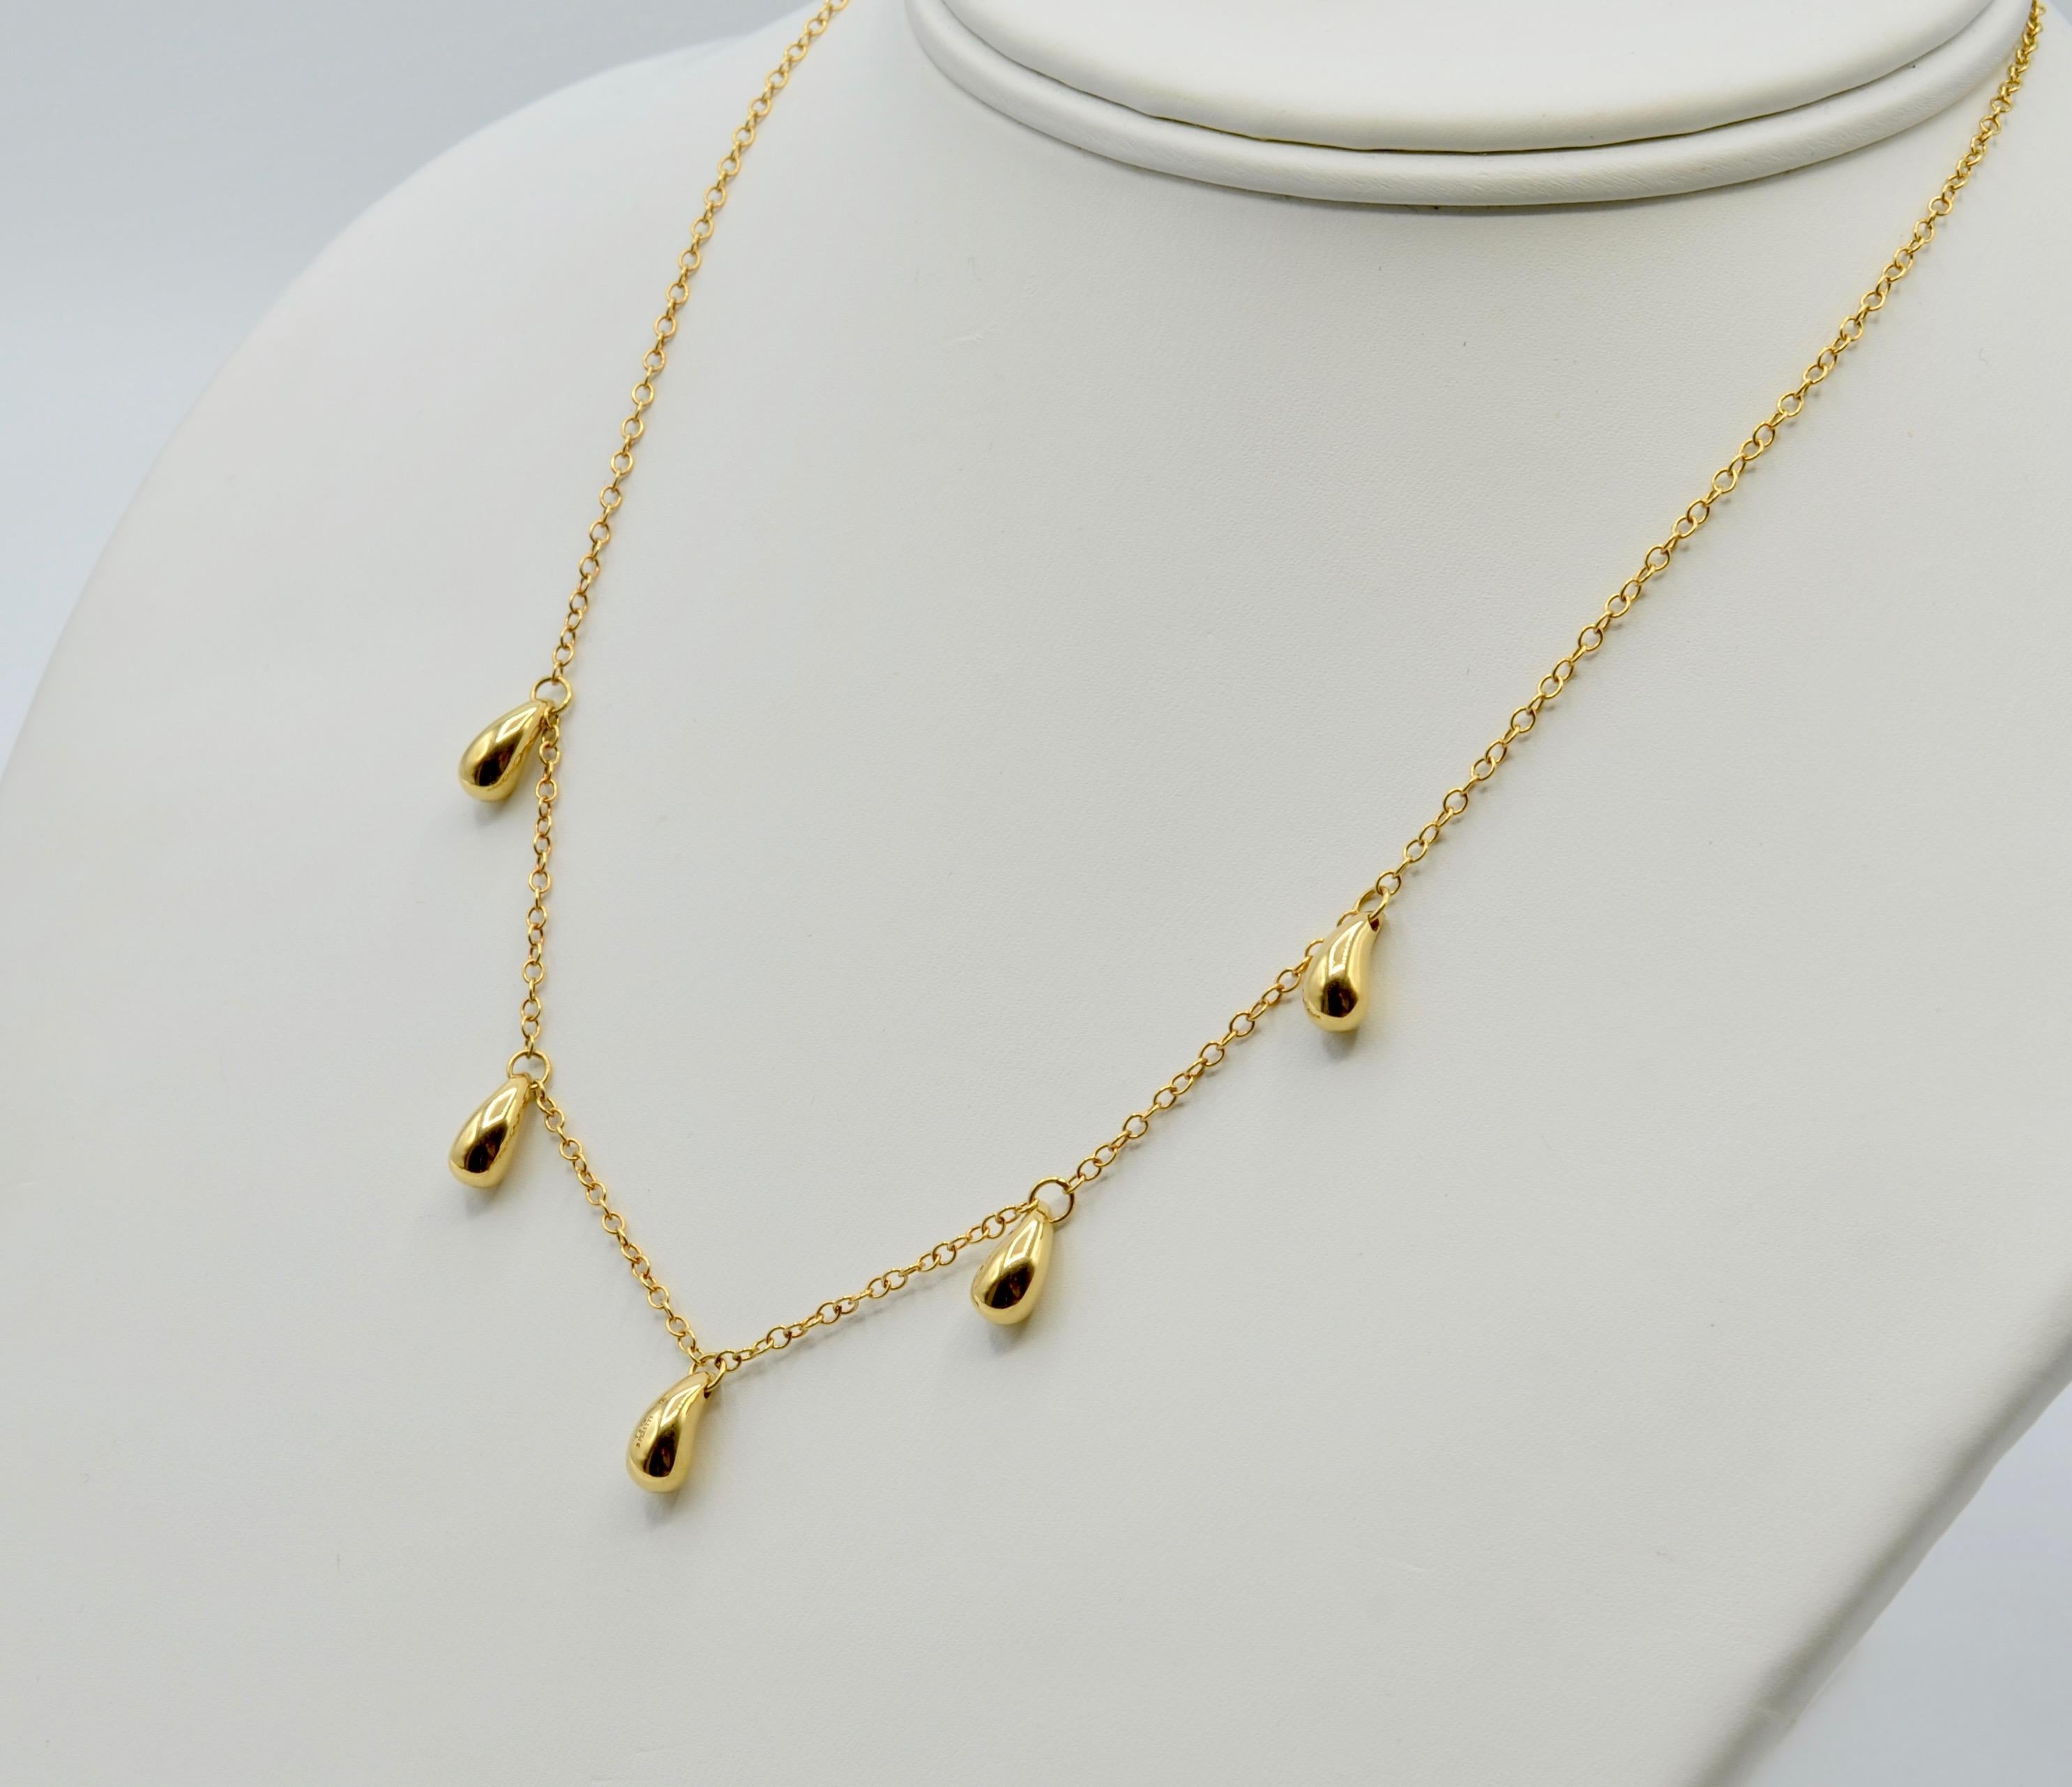 This iconic Elsa Peretti necklace is a beautiful halo around your neck. The 'beans' are solid gold and have a nice weight to them. You can wear it alone or layer with your other favorite pieces. The 16